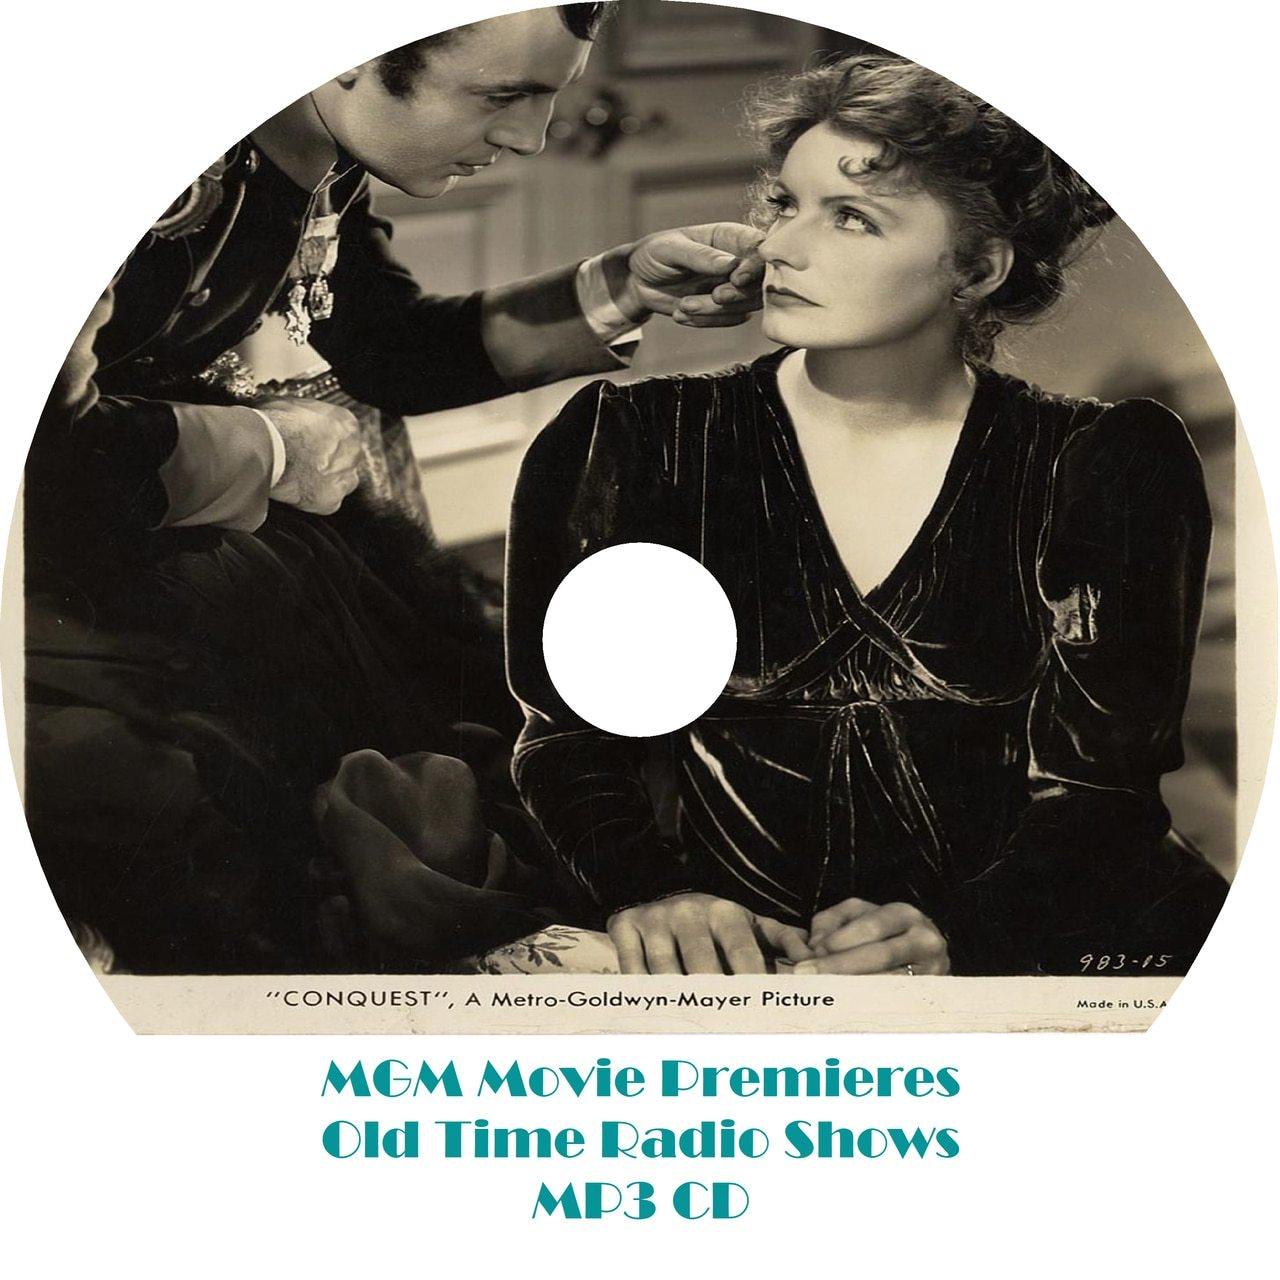 MGM Movie Premieres Old Time Radio Shows 4 Episodes On MP3 CD - OTR World